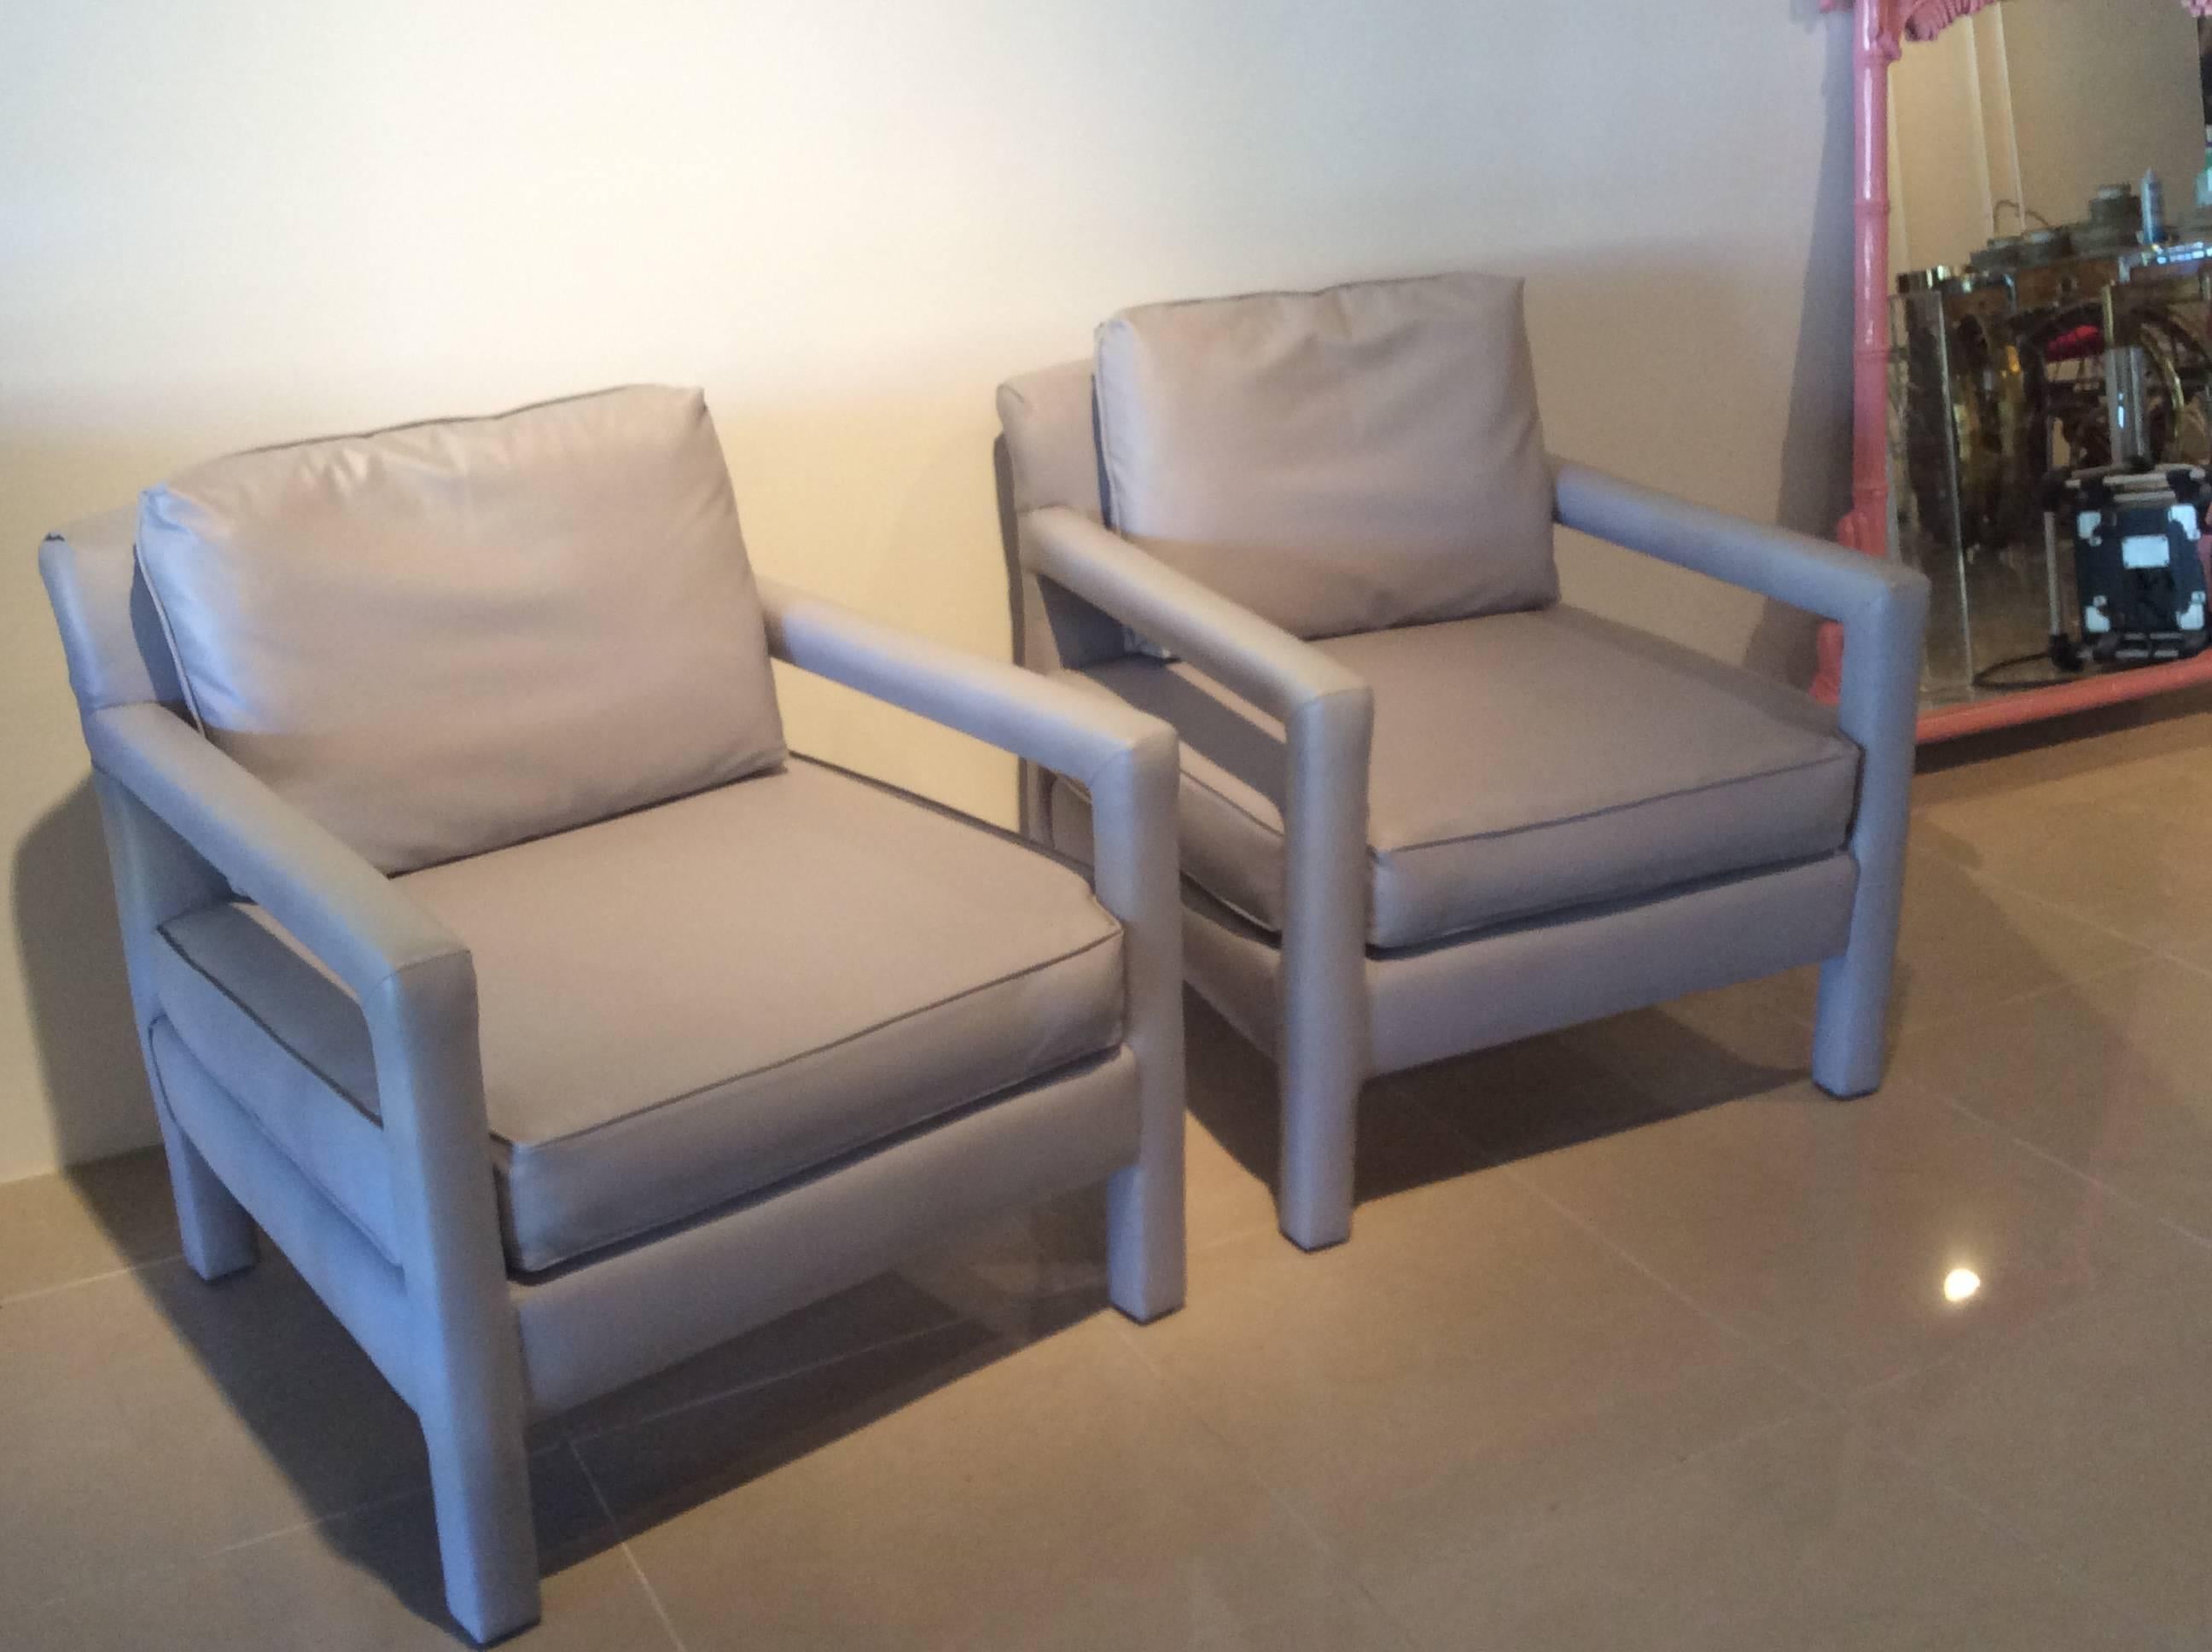 Parsons Chairs Vintage Pair of Grey Leather Arm Chairs Milo Baughman Style 1